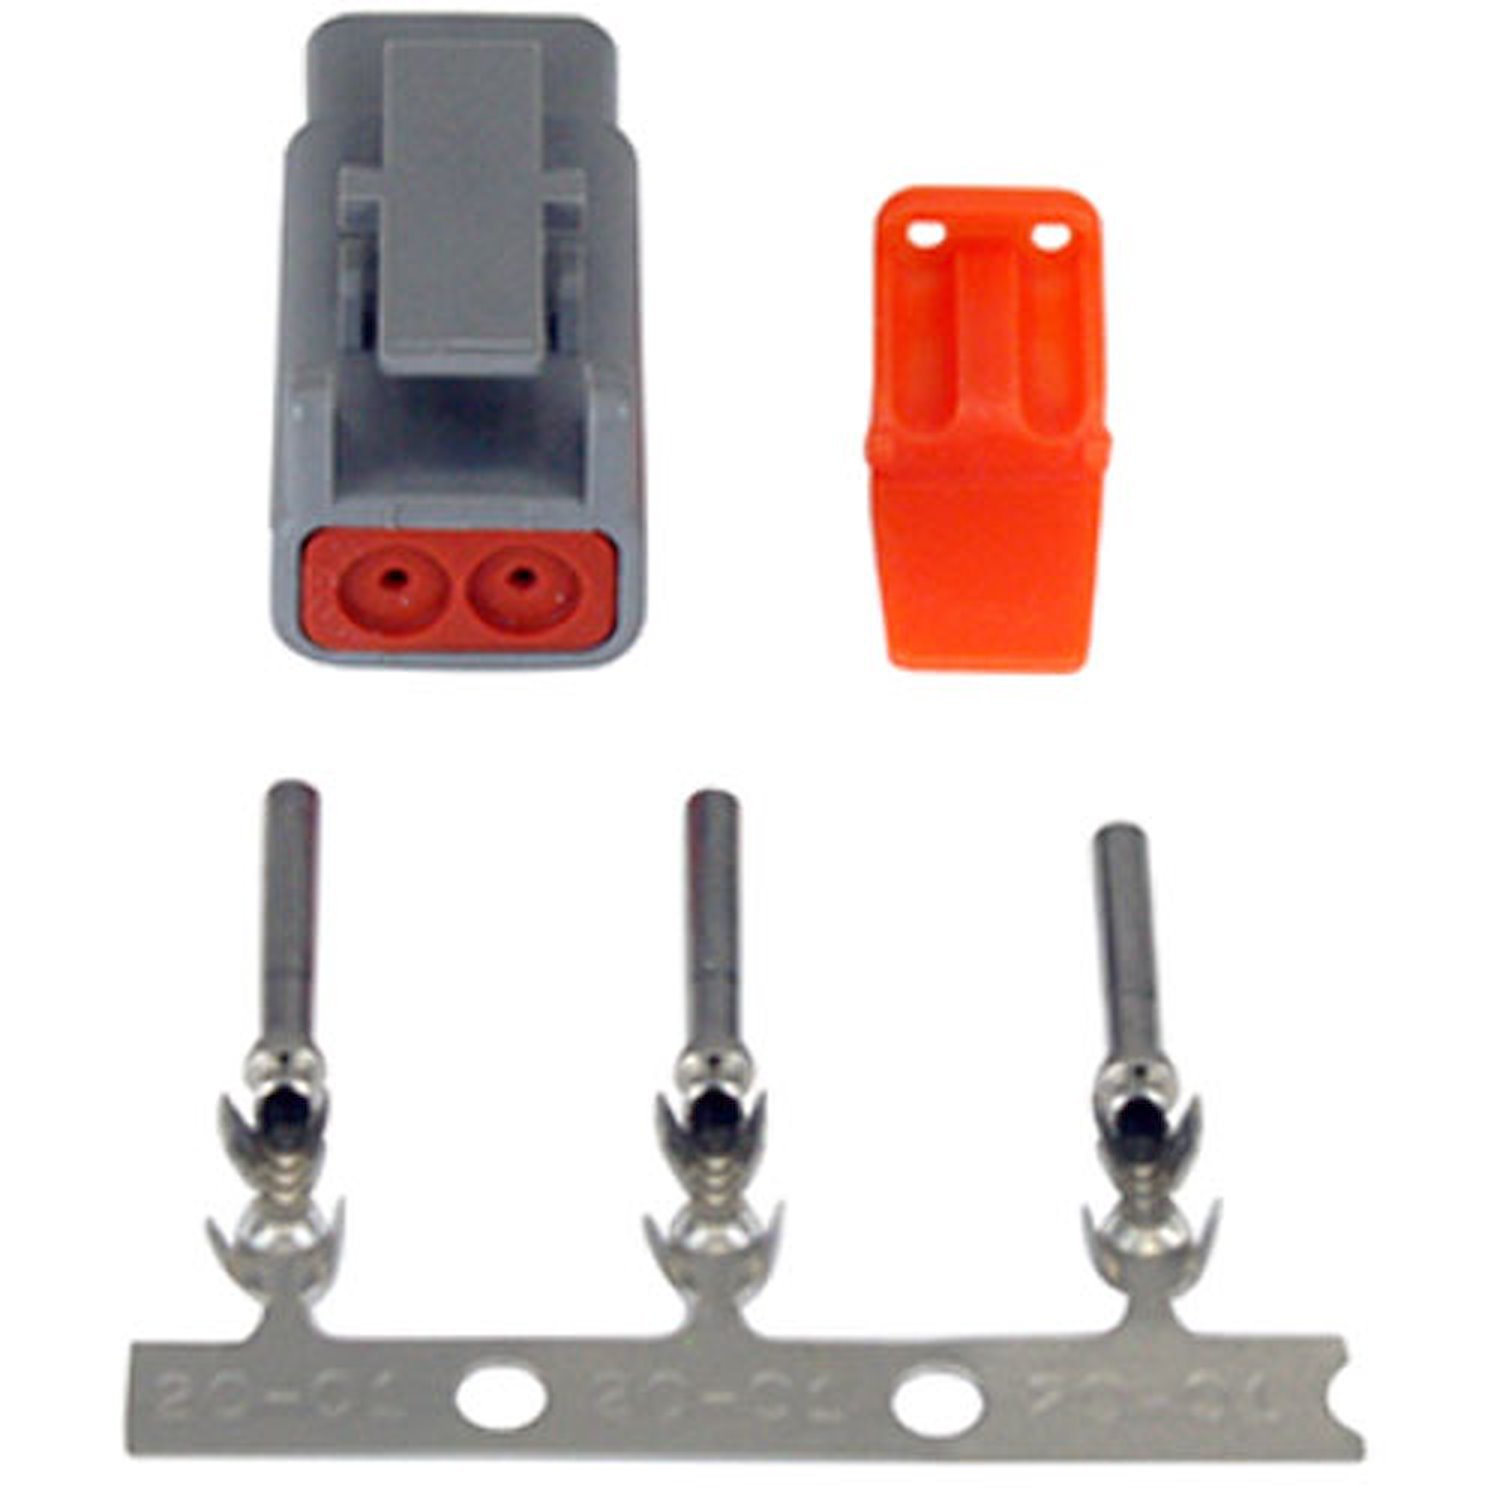 DTM-Style 2-Way Plug Connector Kit Includes Plug, Plug Wedge Lock And 3 Female Pins